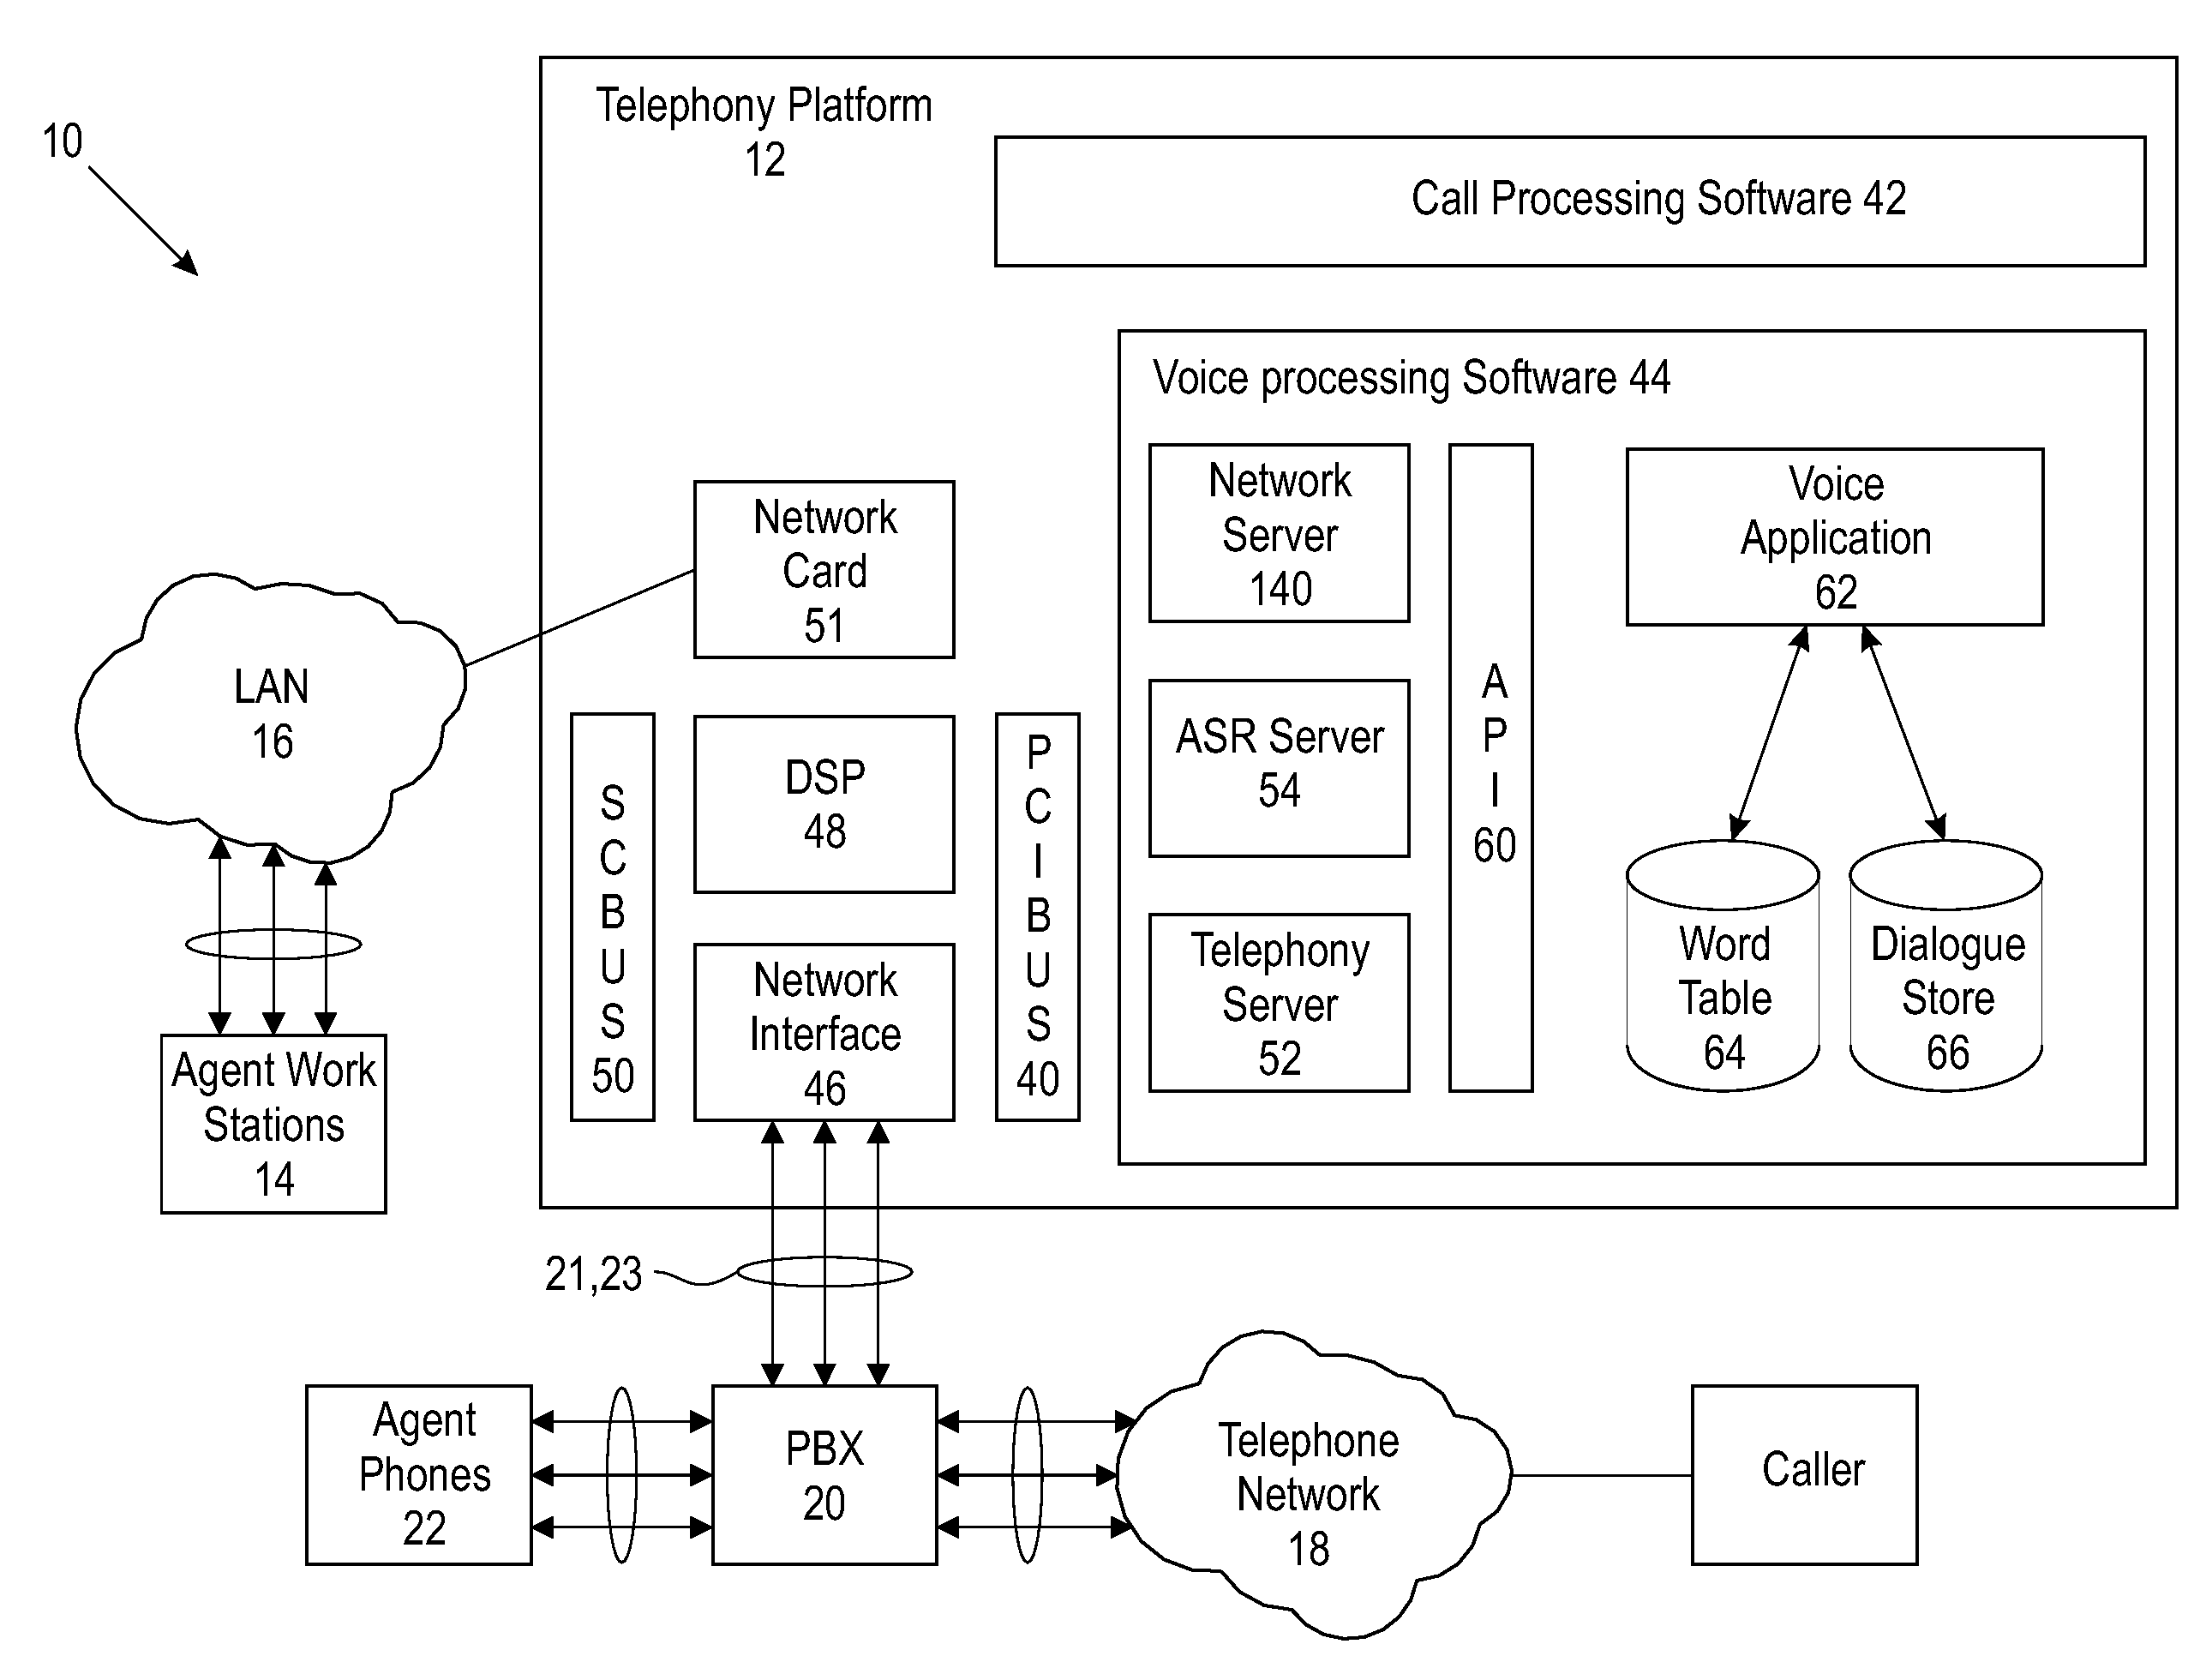 Method and System for Call Processing